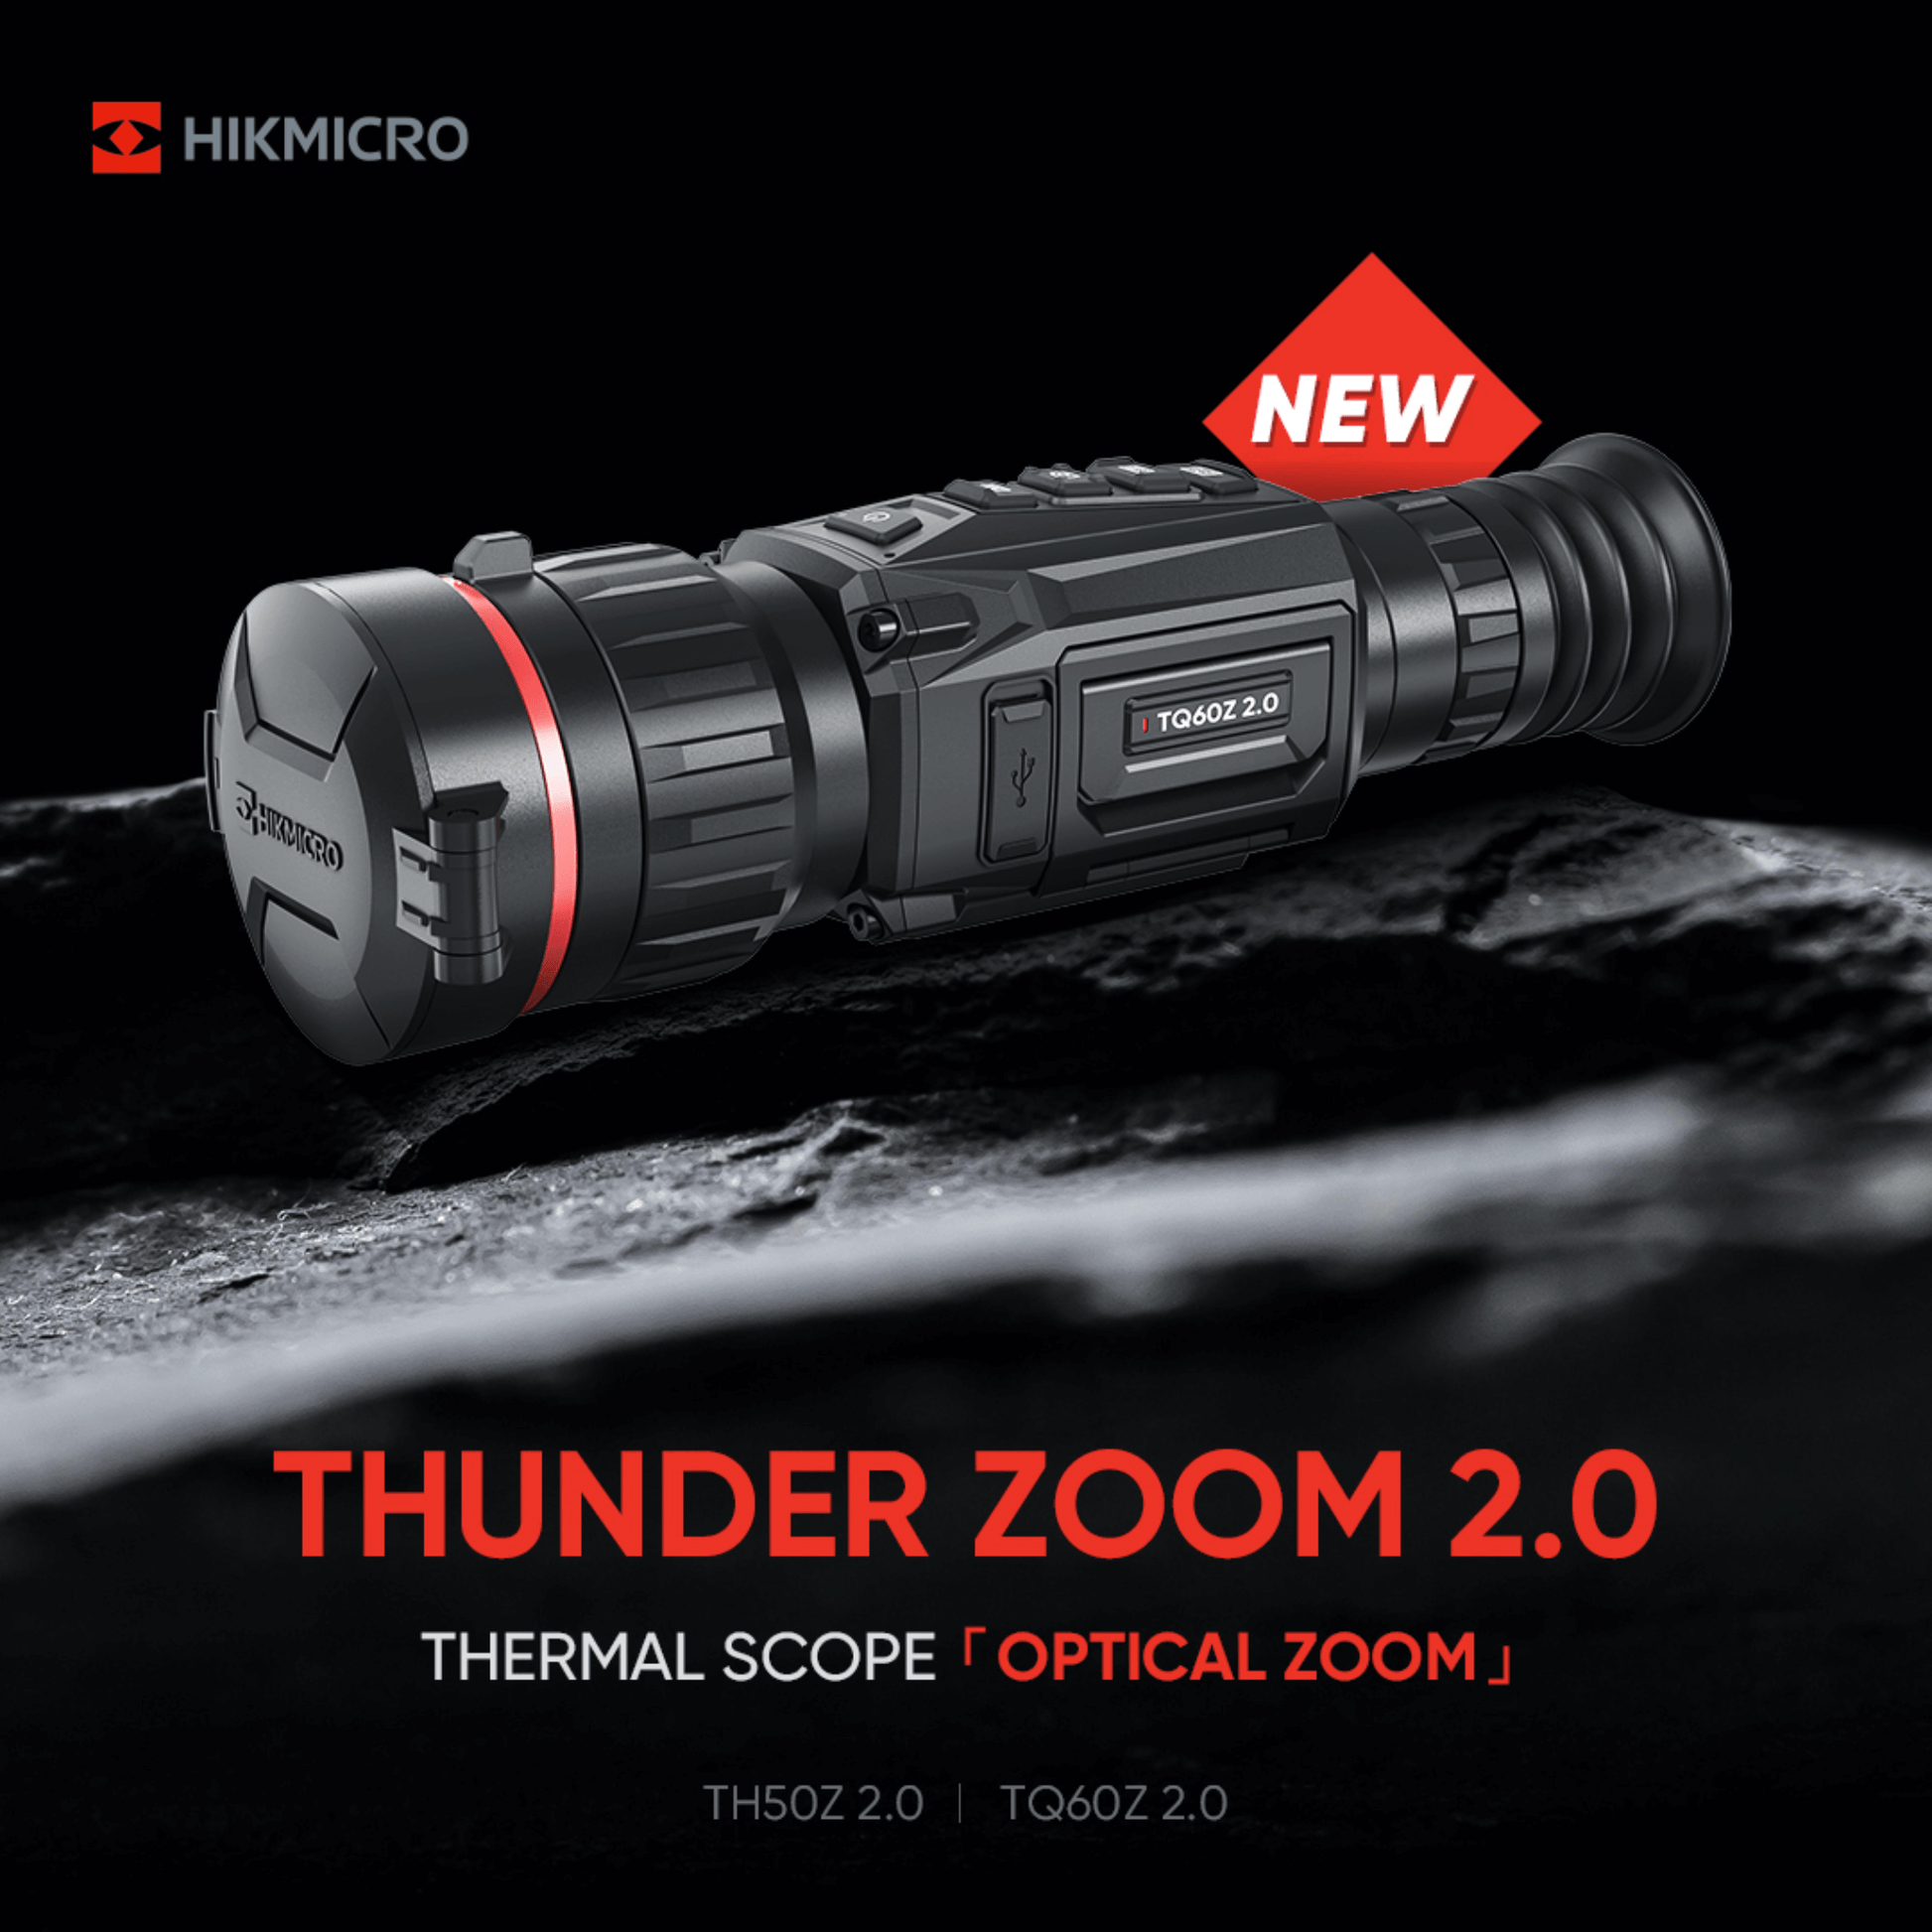 HikMicro Thunder Zoom TQ60Z 2.0 Is a thermal rifle scope with optical zoom on the thermal lens